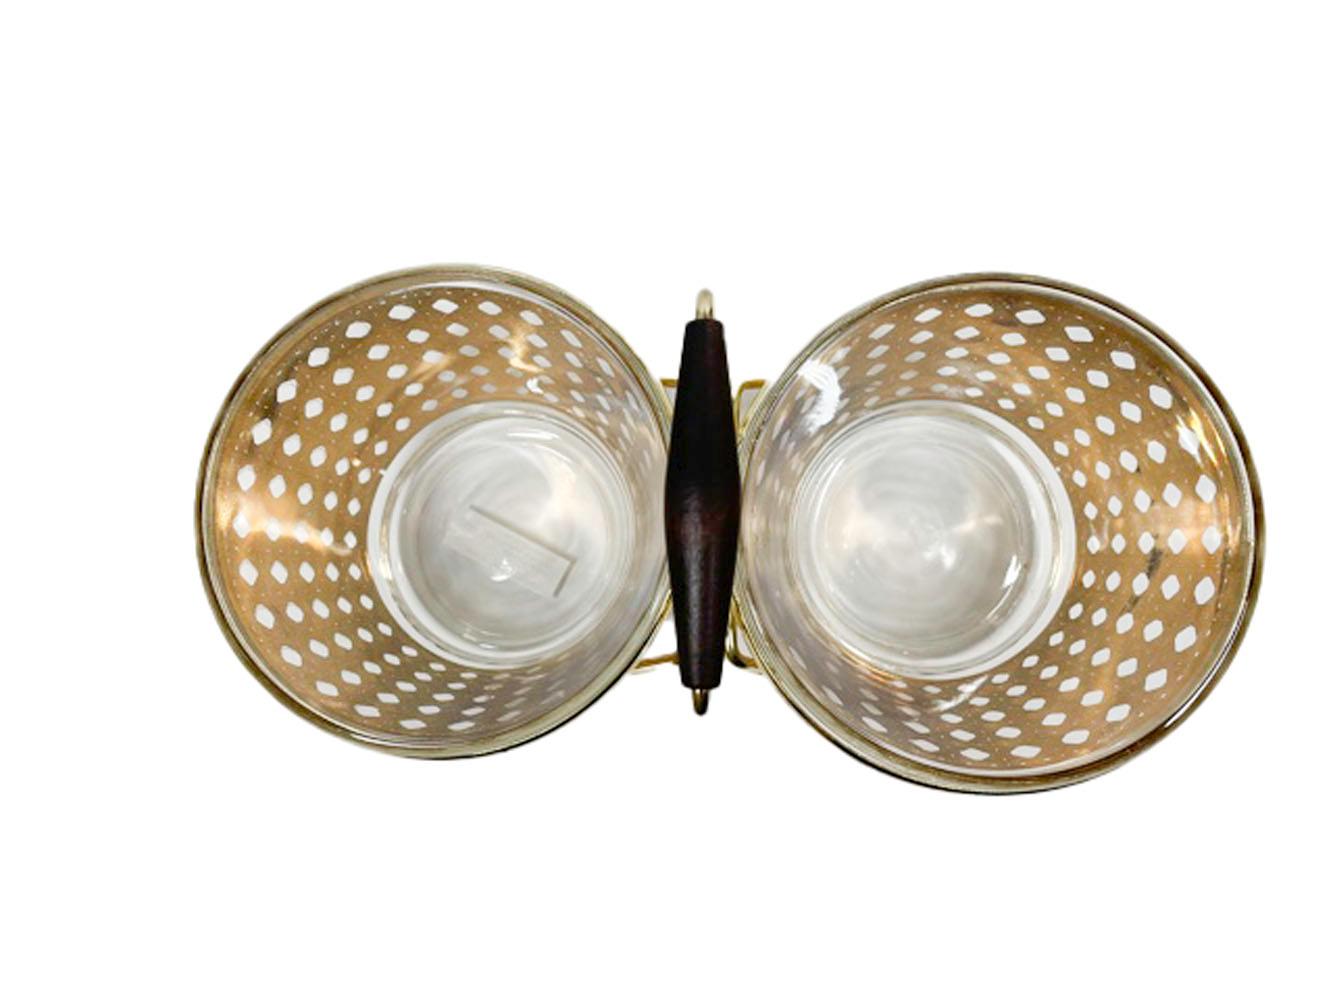 20th Century Unusual Vintage Culver Double Ice Bowls in the Canella Pattern with Metal Caddy